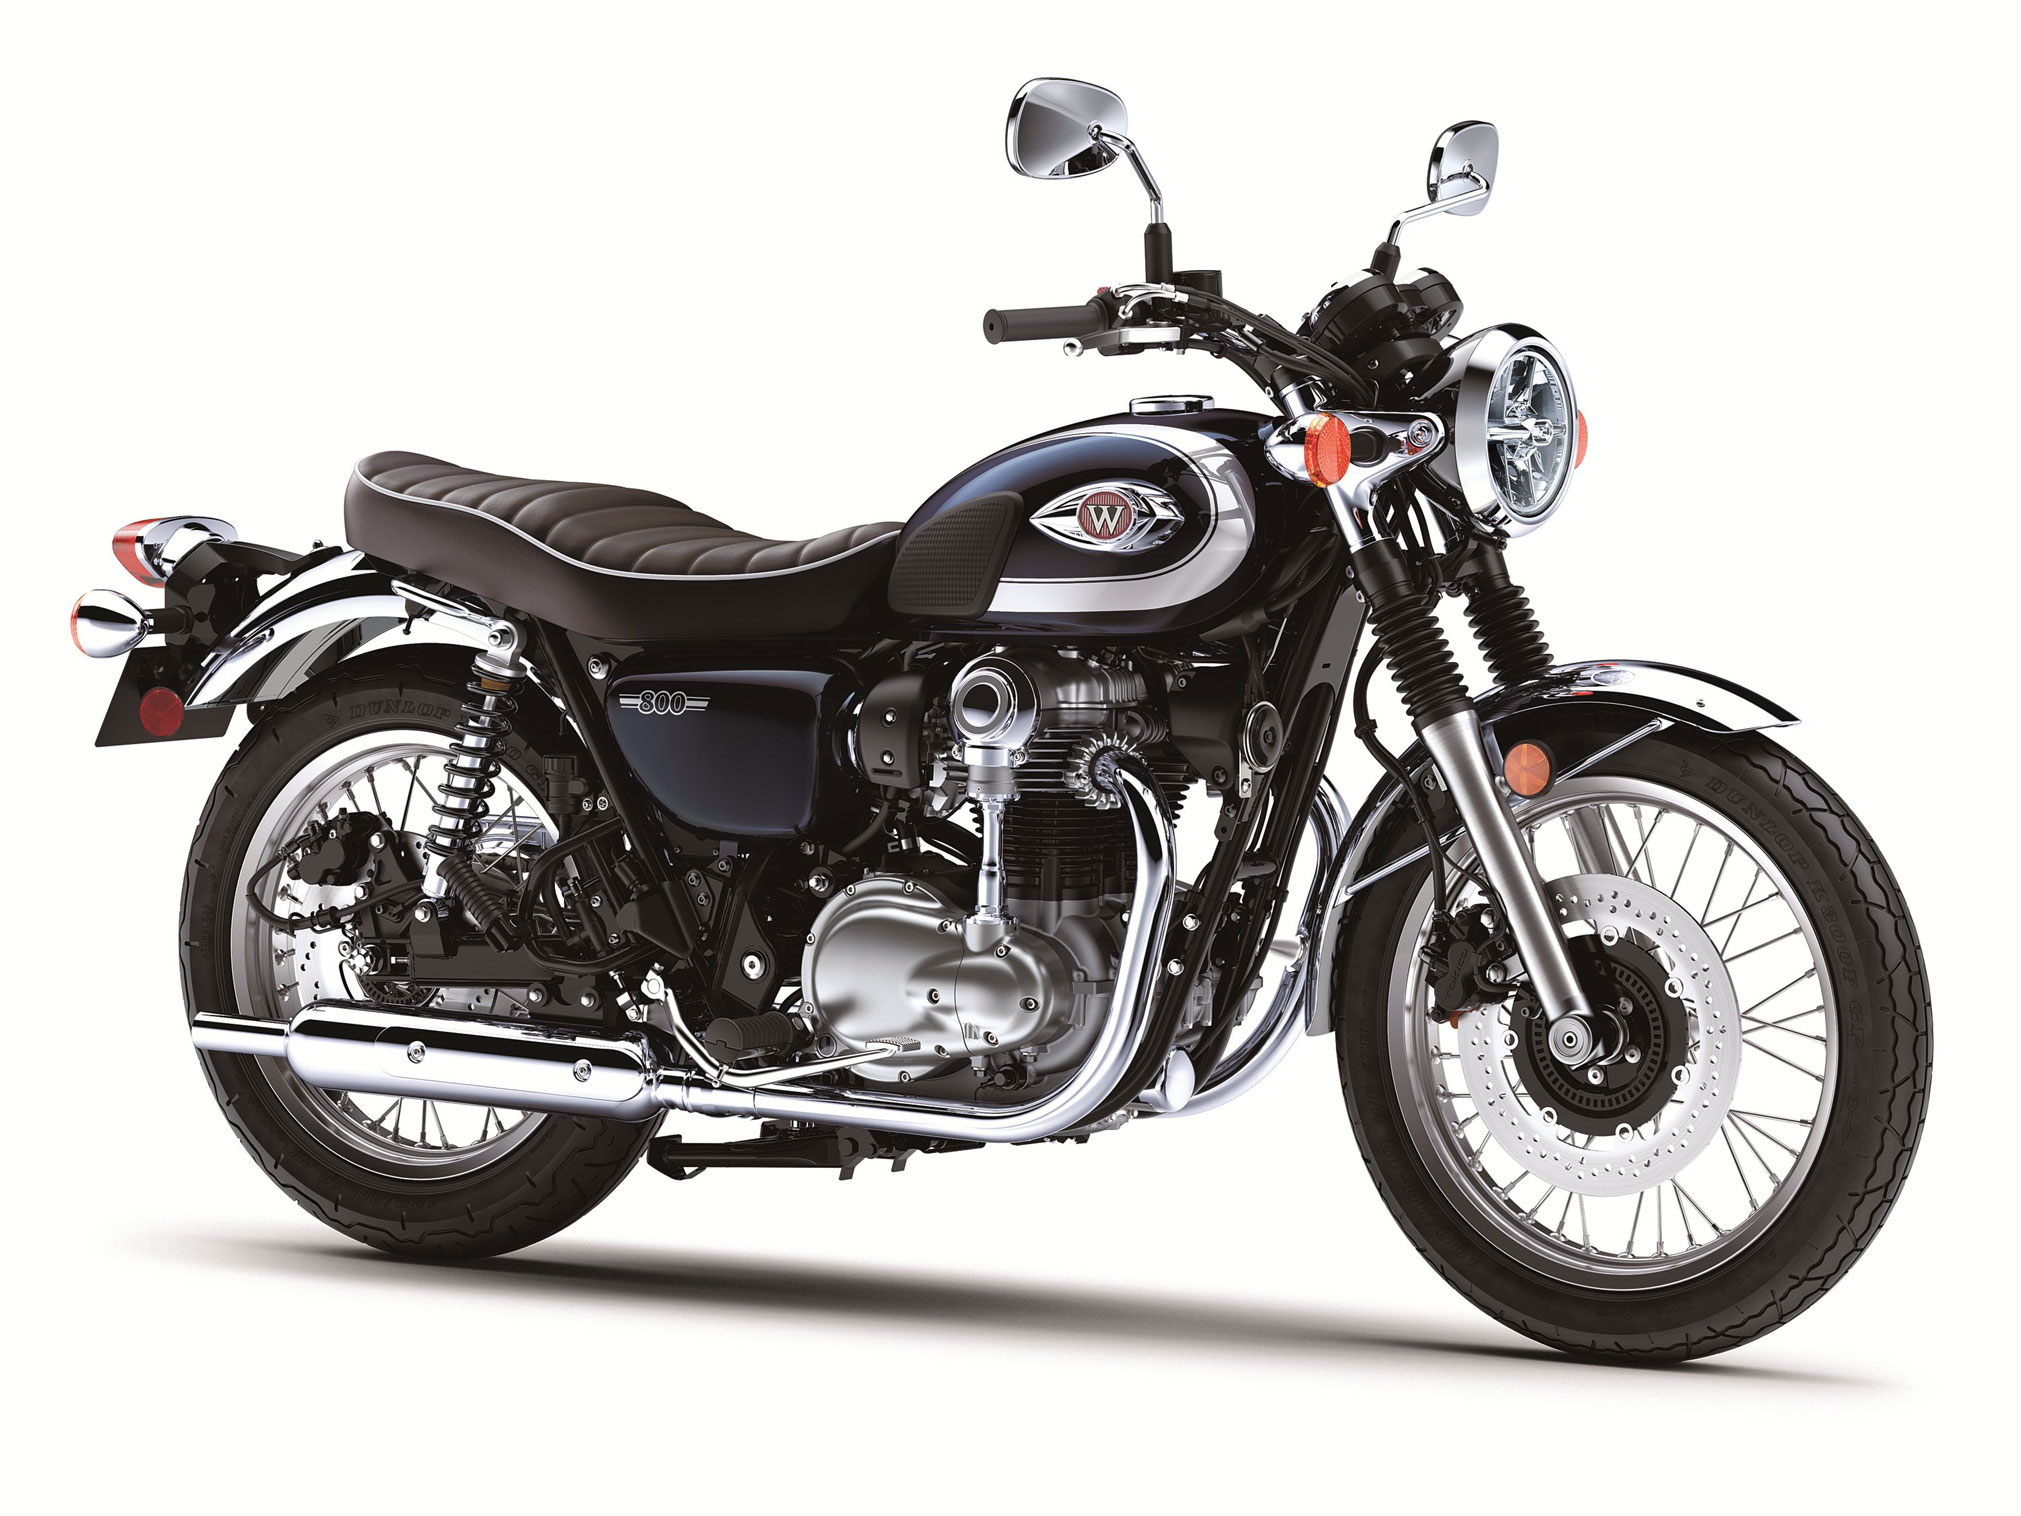 2021 W800 Guide • Total Motorcycle